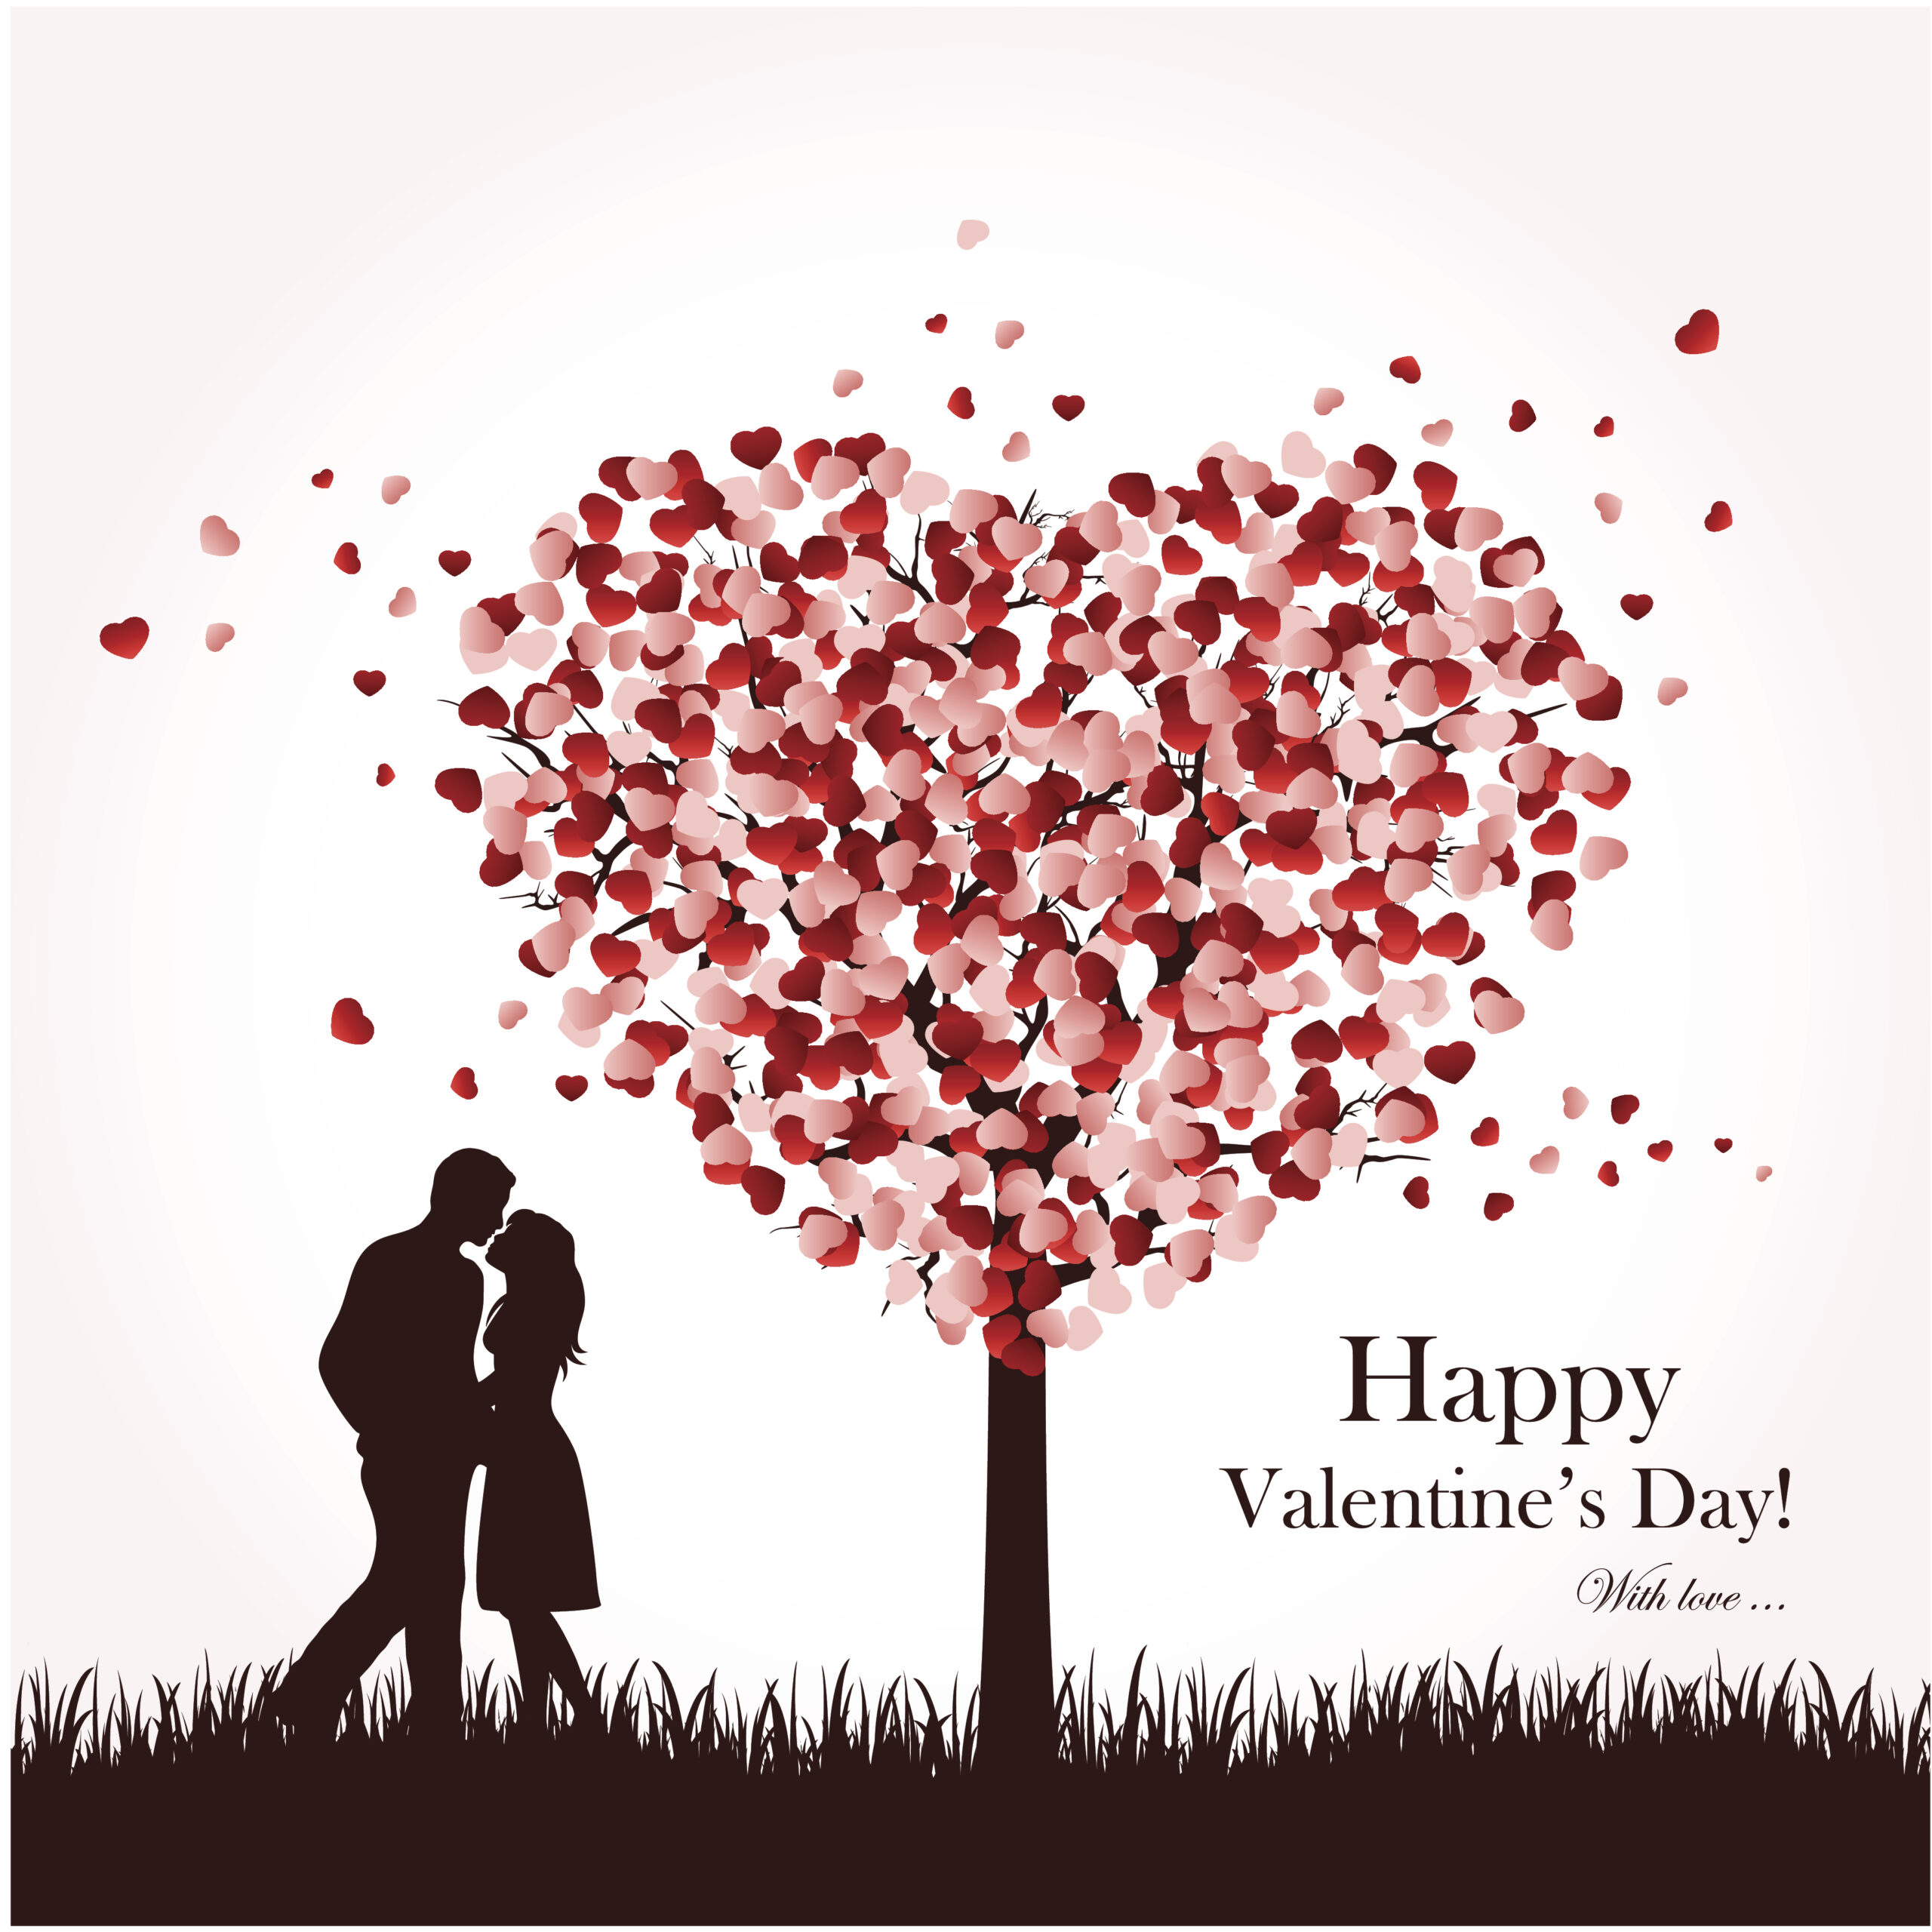 <h1 class="tribe-events-single-event-title">Free Make Your Own Nature-Themed Valentine’s Day Cards</h1>